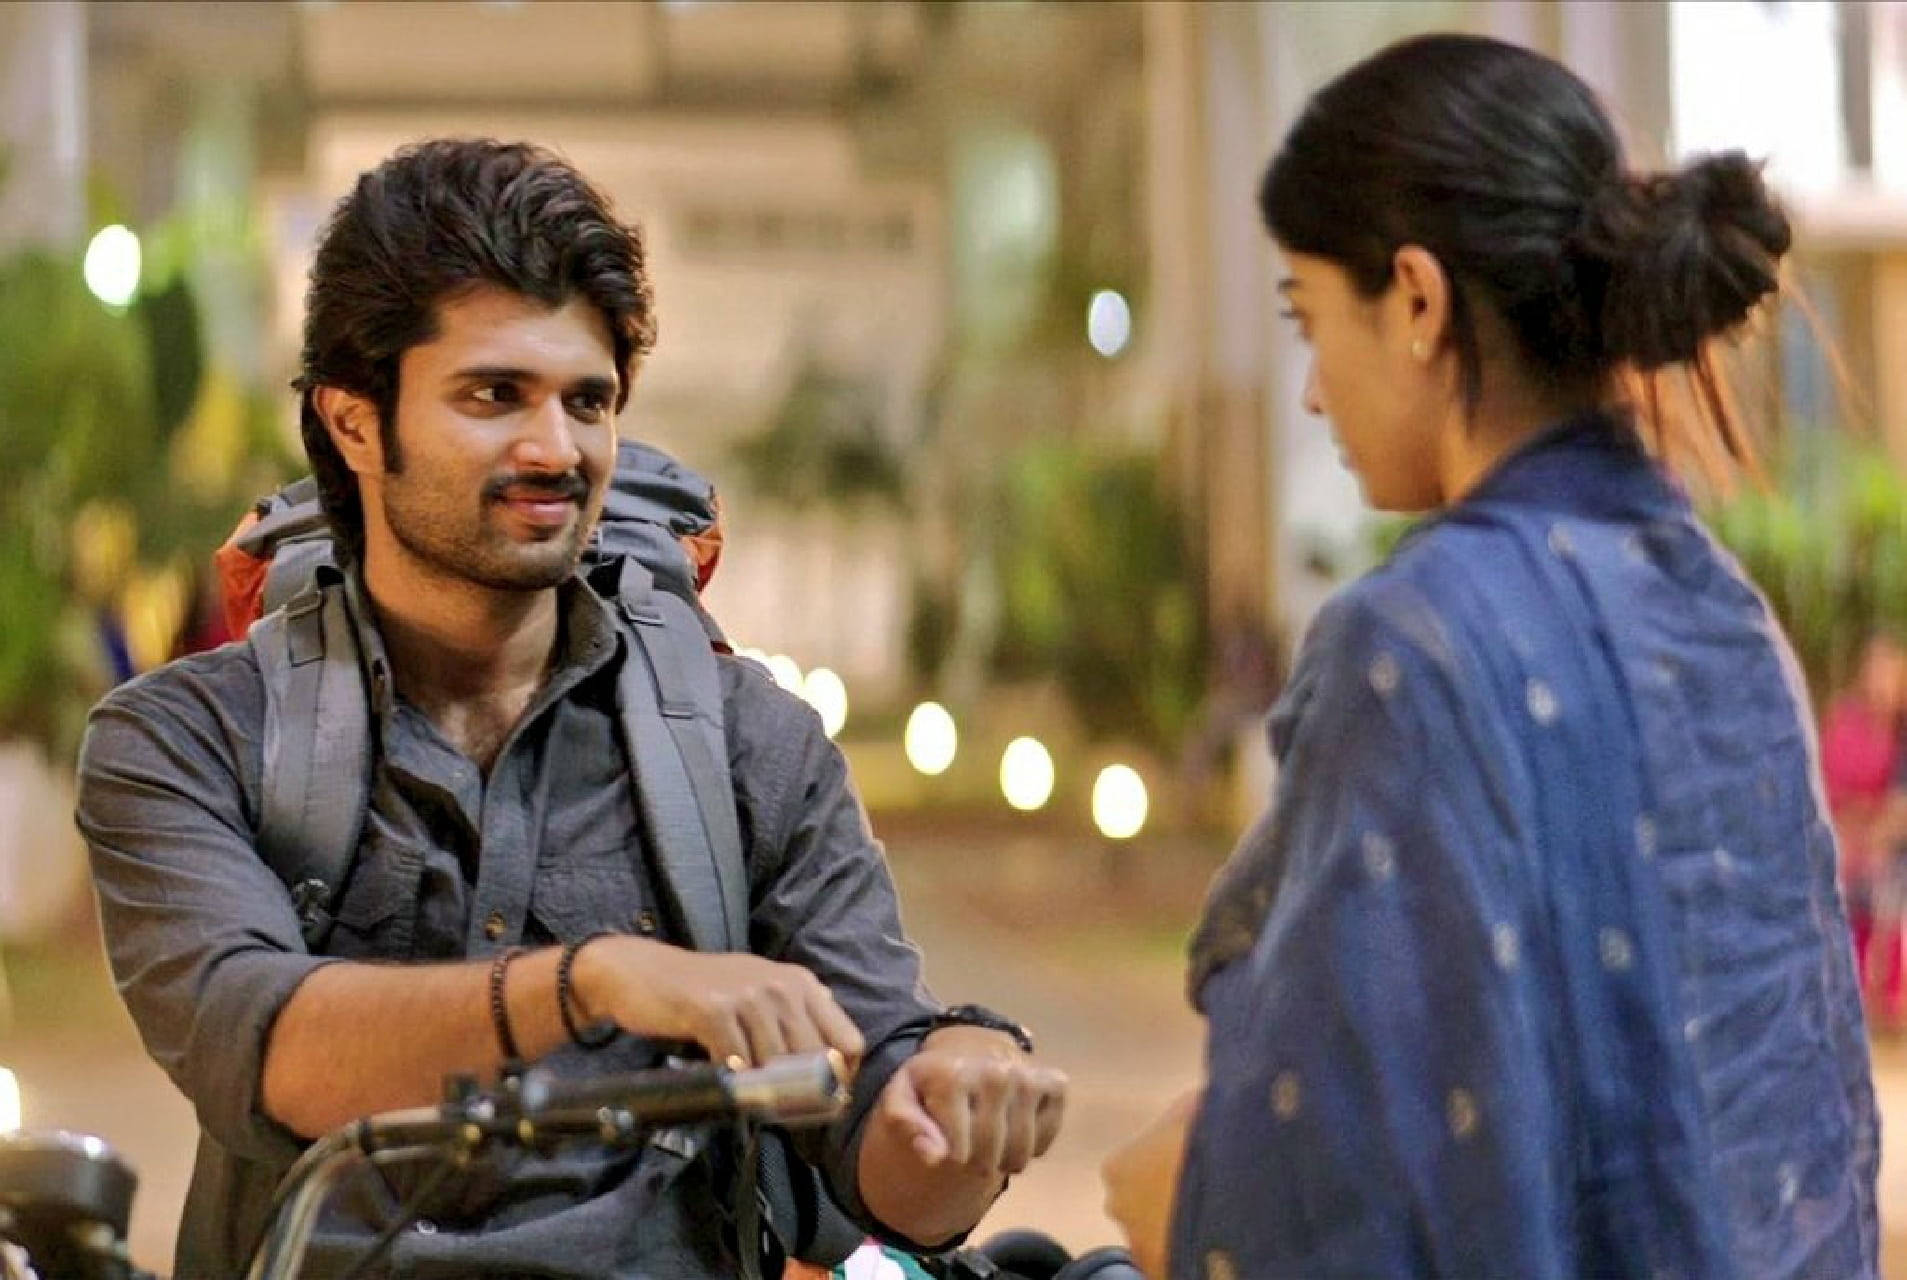 Arjun Reddy And Shalini In A Romantic Moment. Background